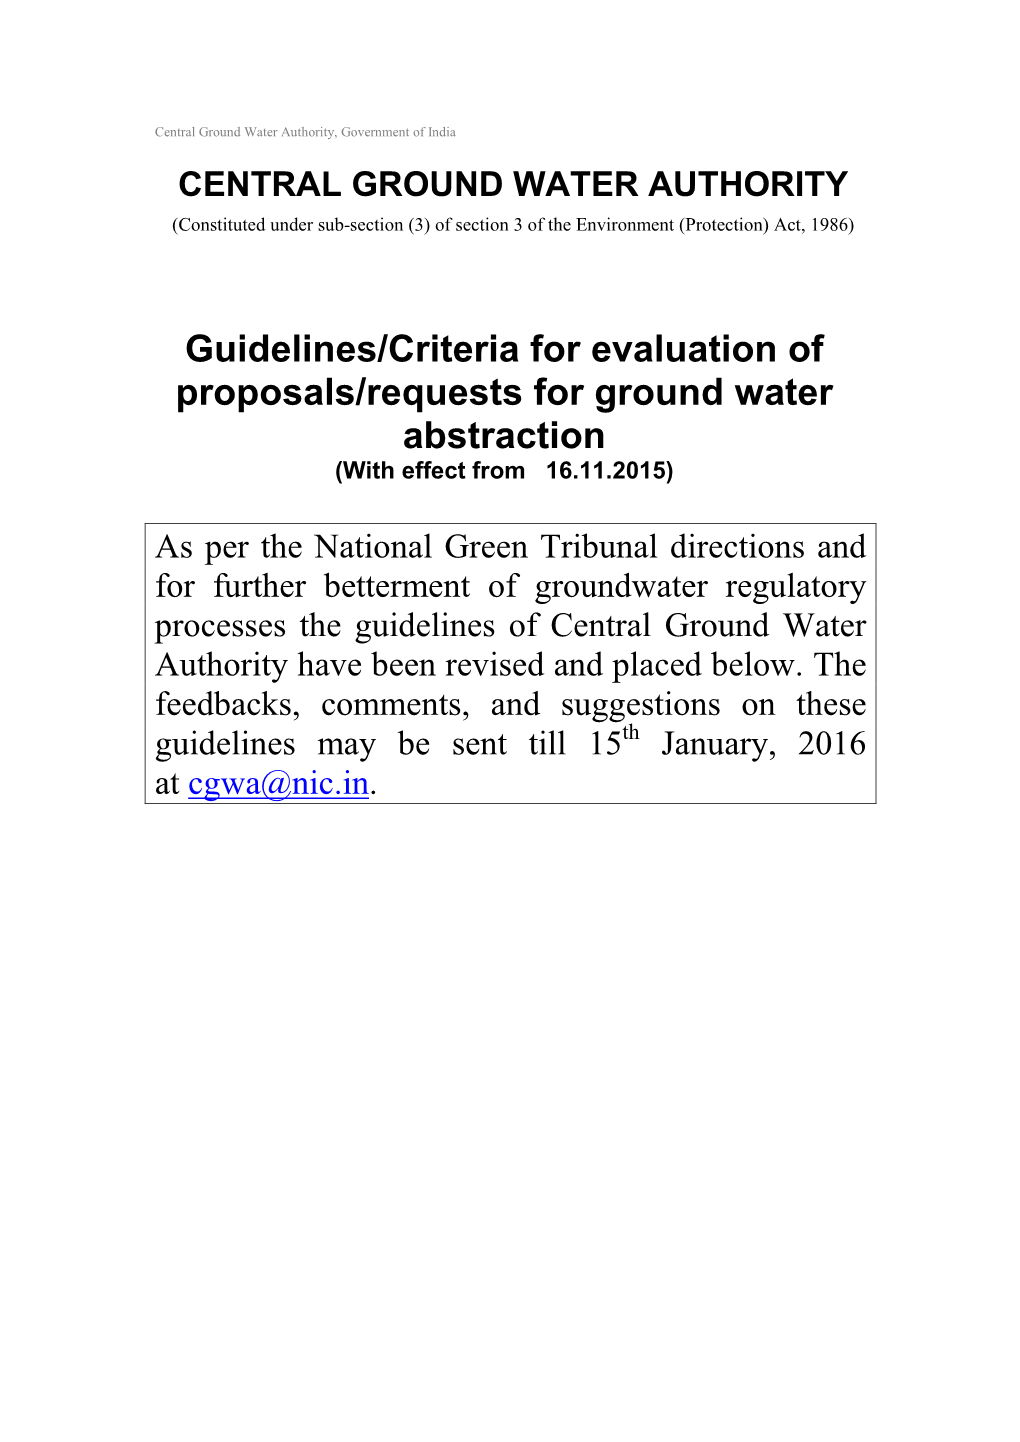 CGWA Guidelines/Criteria for Evaluation of Proposals/Requests For